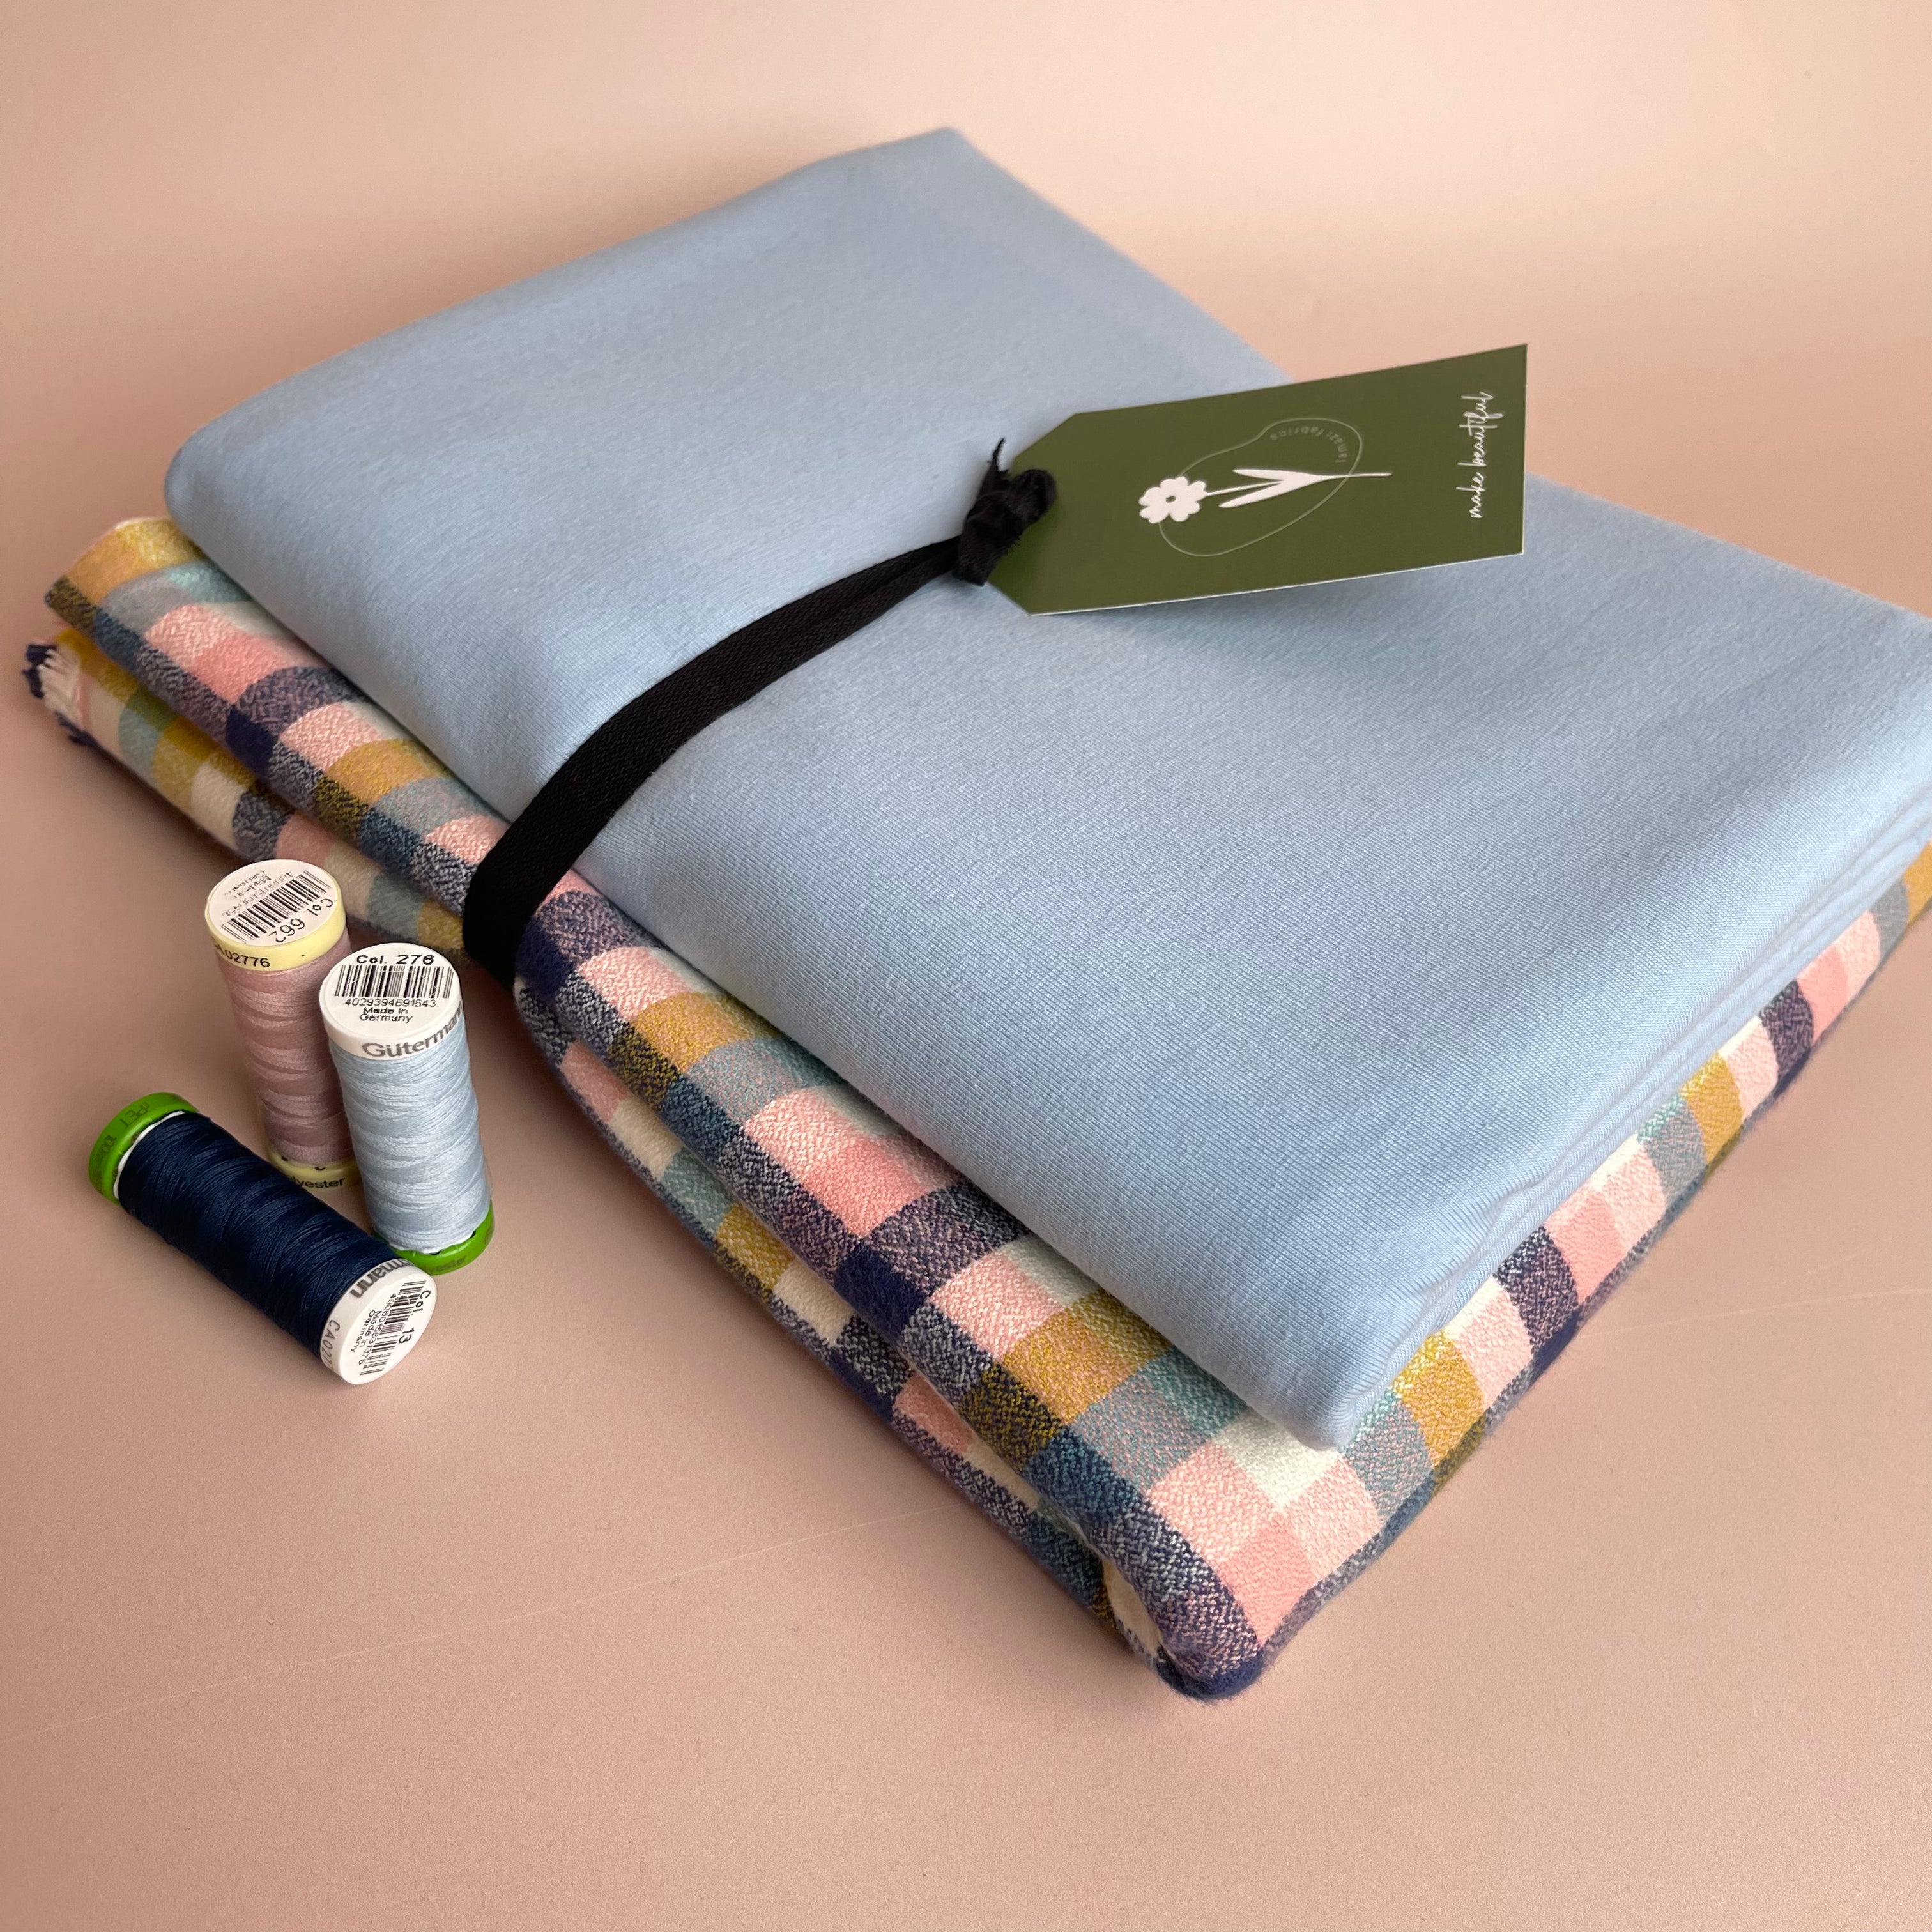 Limited Edition - Luxury Pyjama Kit with Summer Mammoth Flannel